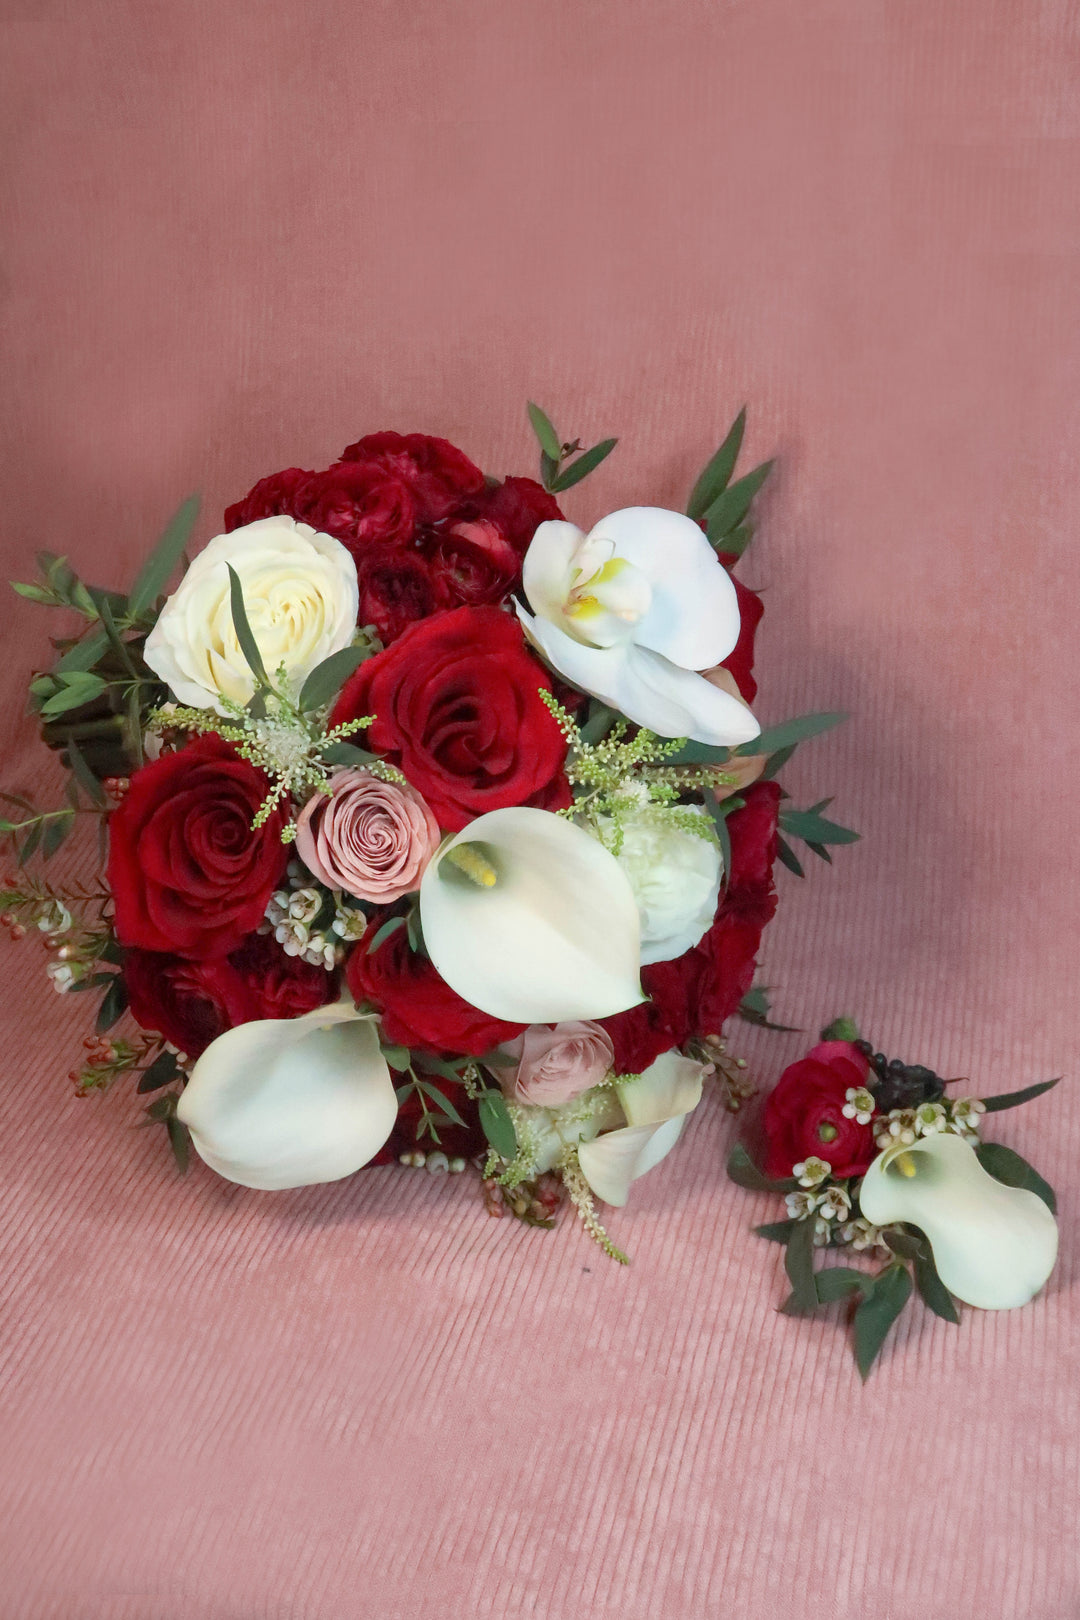 Bridal Bouquet - Hand-Tied - Red